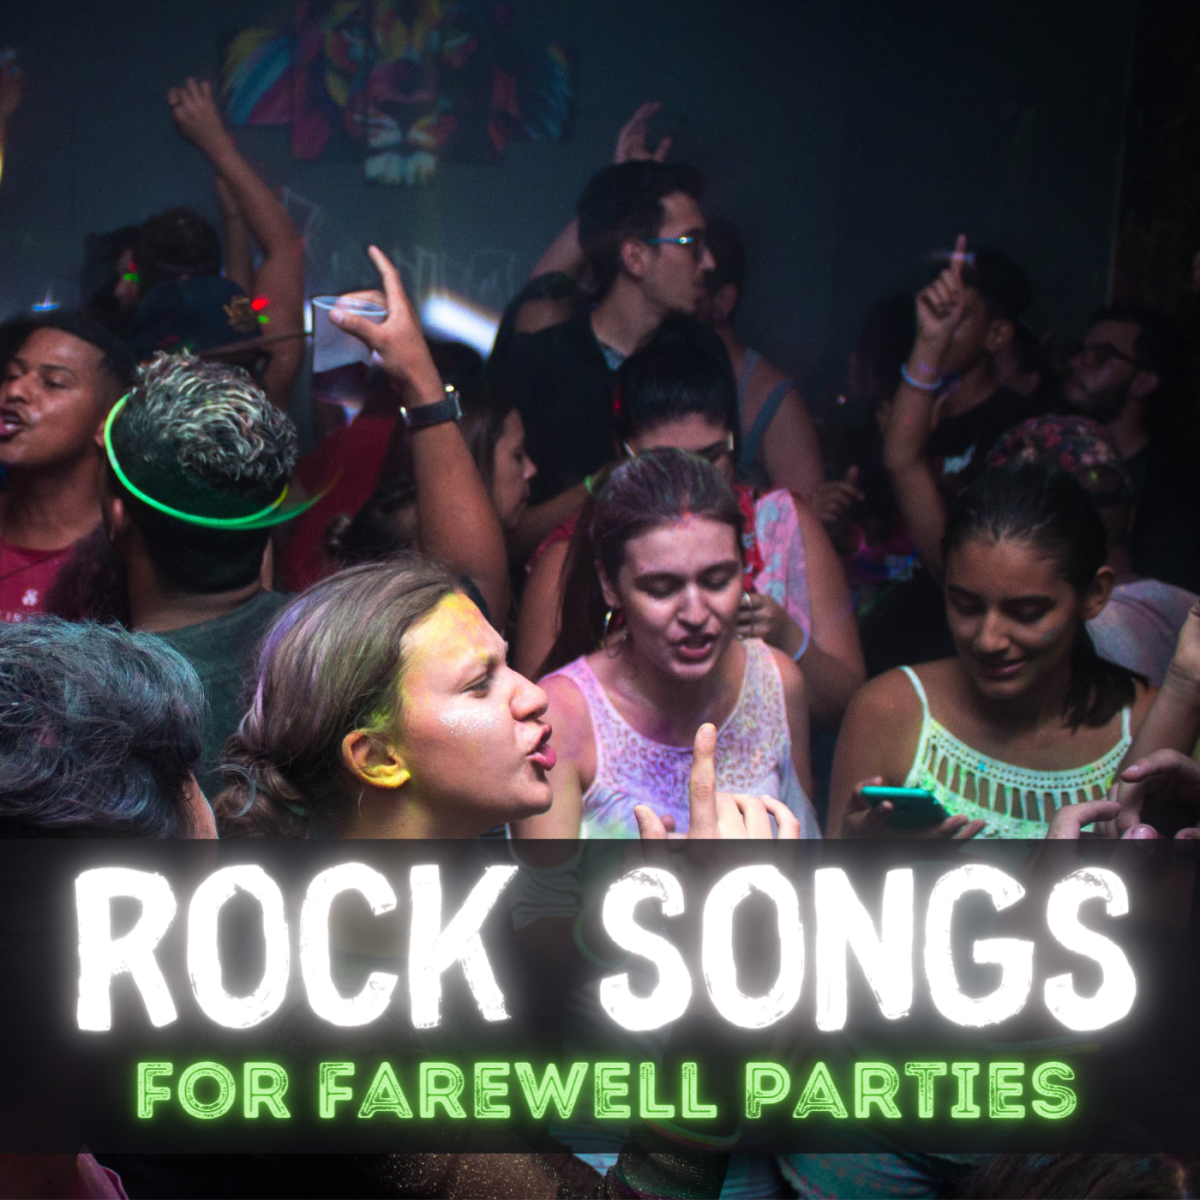 Go out with a bang by playing these rock hits at your going-away party!